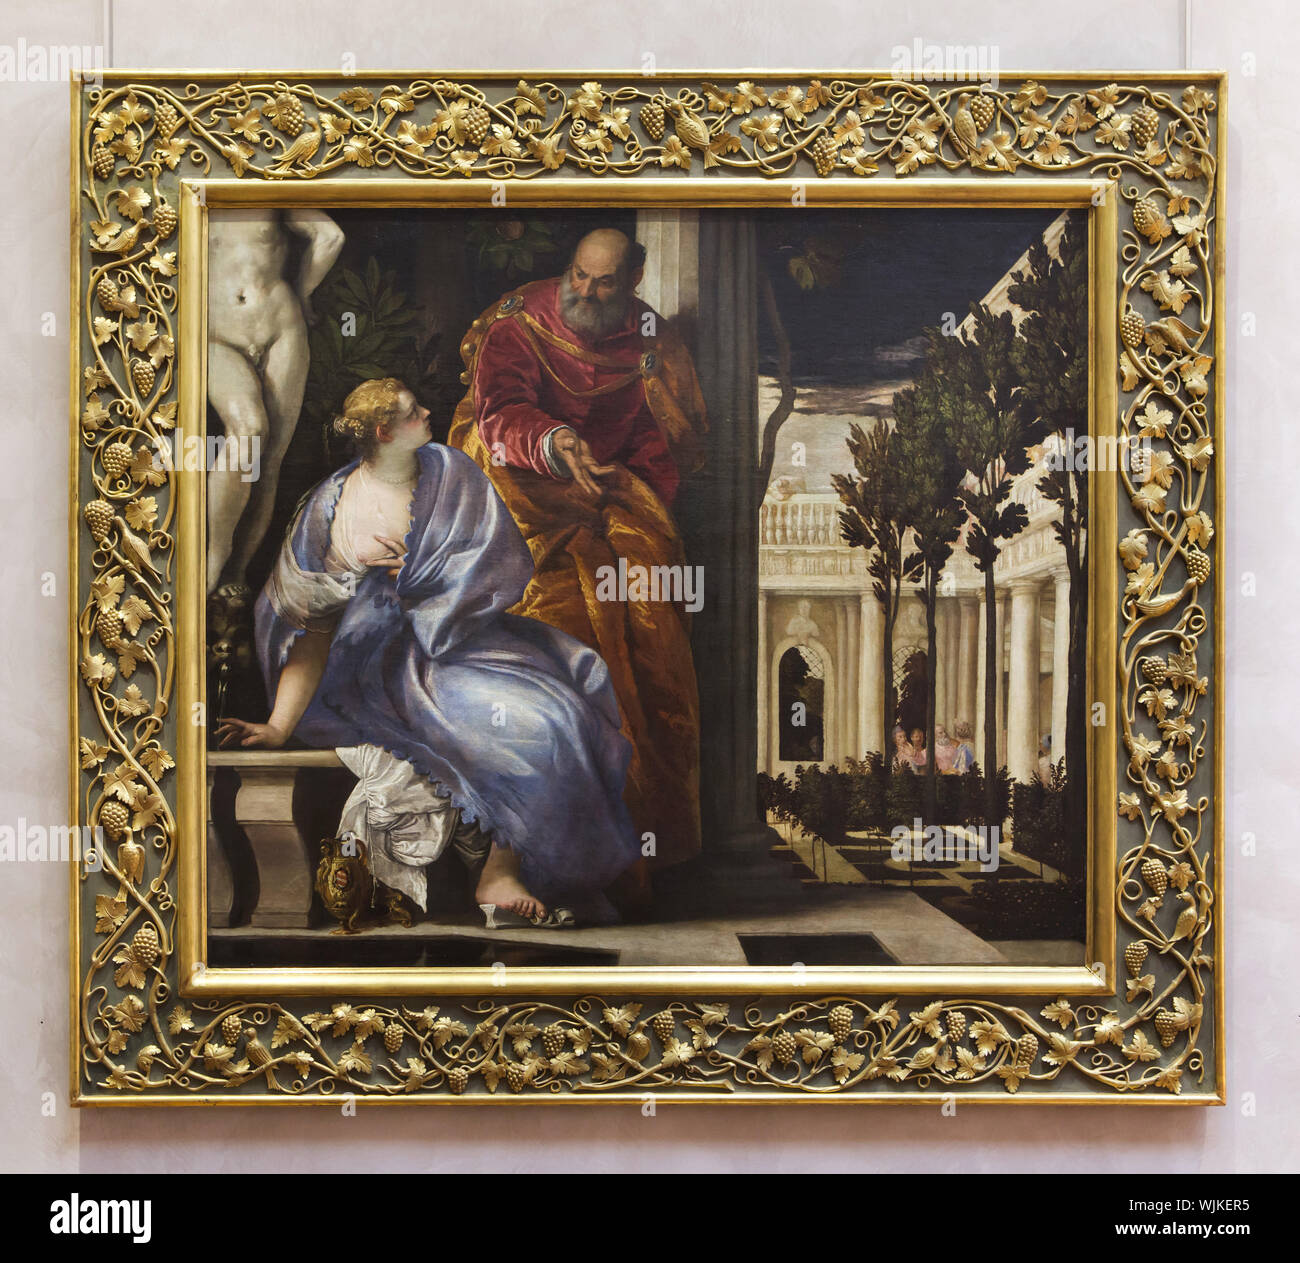 Painting 'Bathsheba Bathing' by Italian Renaissance painter Paolo Veronese (1575) on display in the Museum of Fine Arts (Musée des Beaux-Arts de Lyon) in Lyon, France. Stock Photo